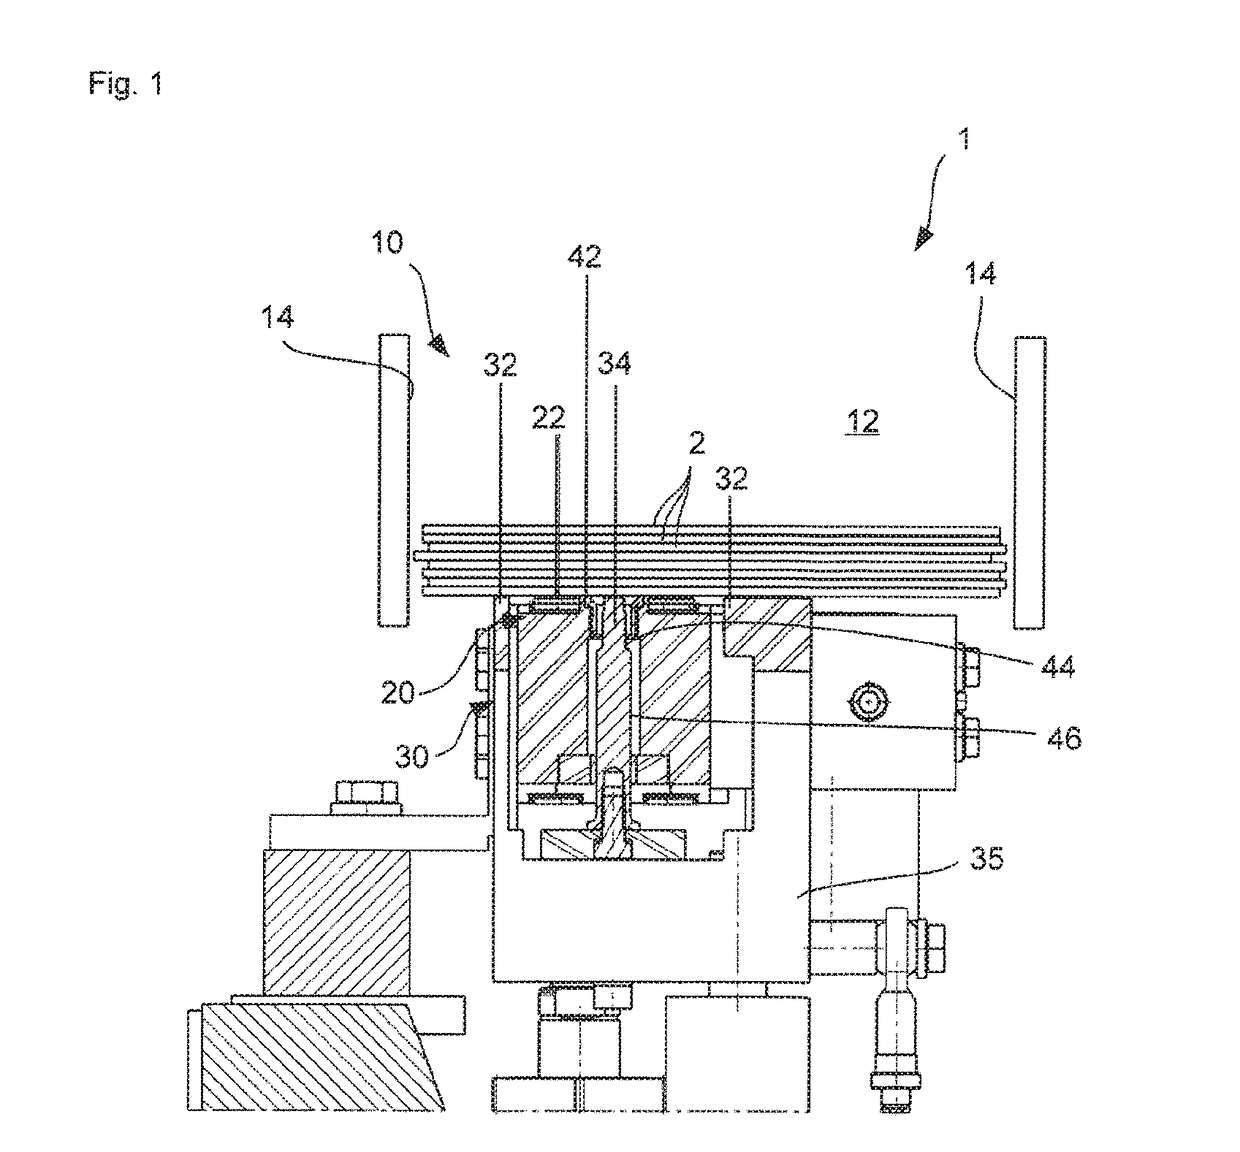 Apparatus for separating workpieces